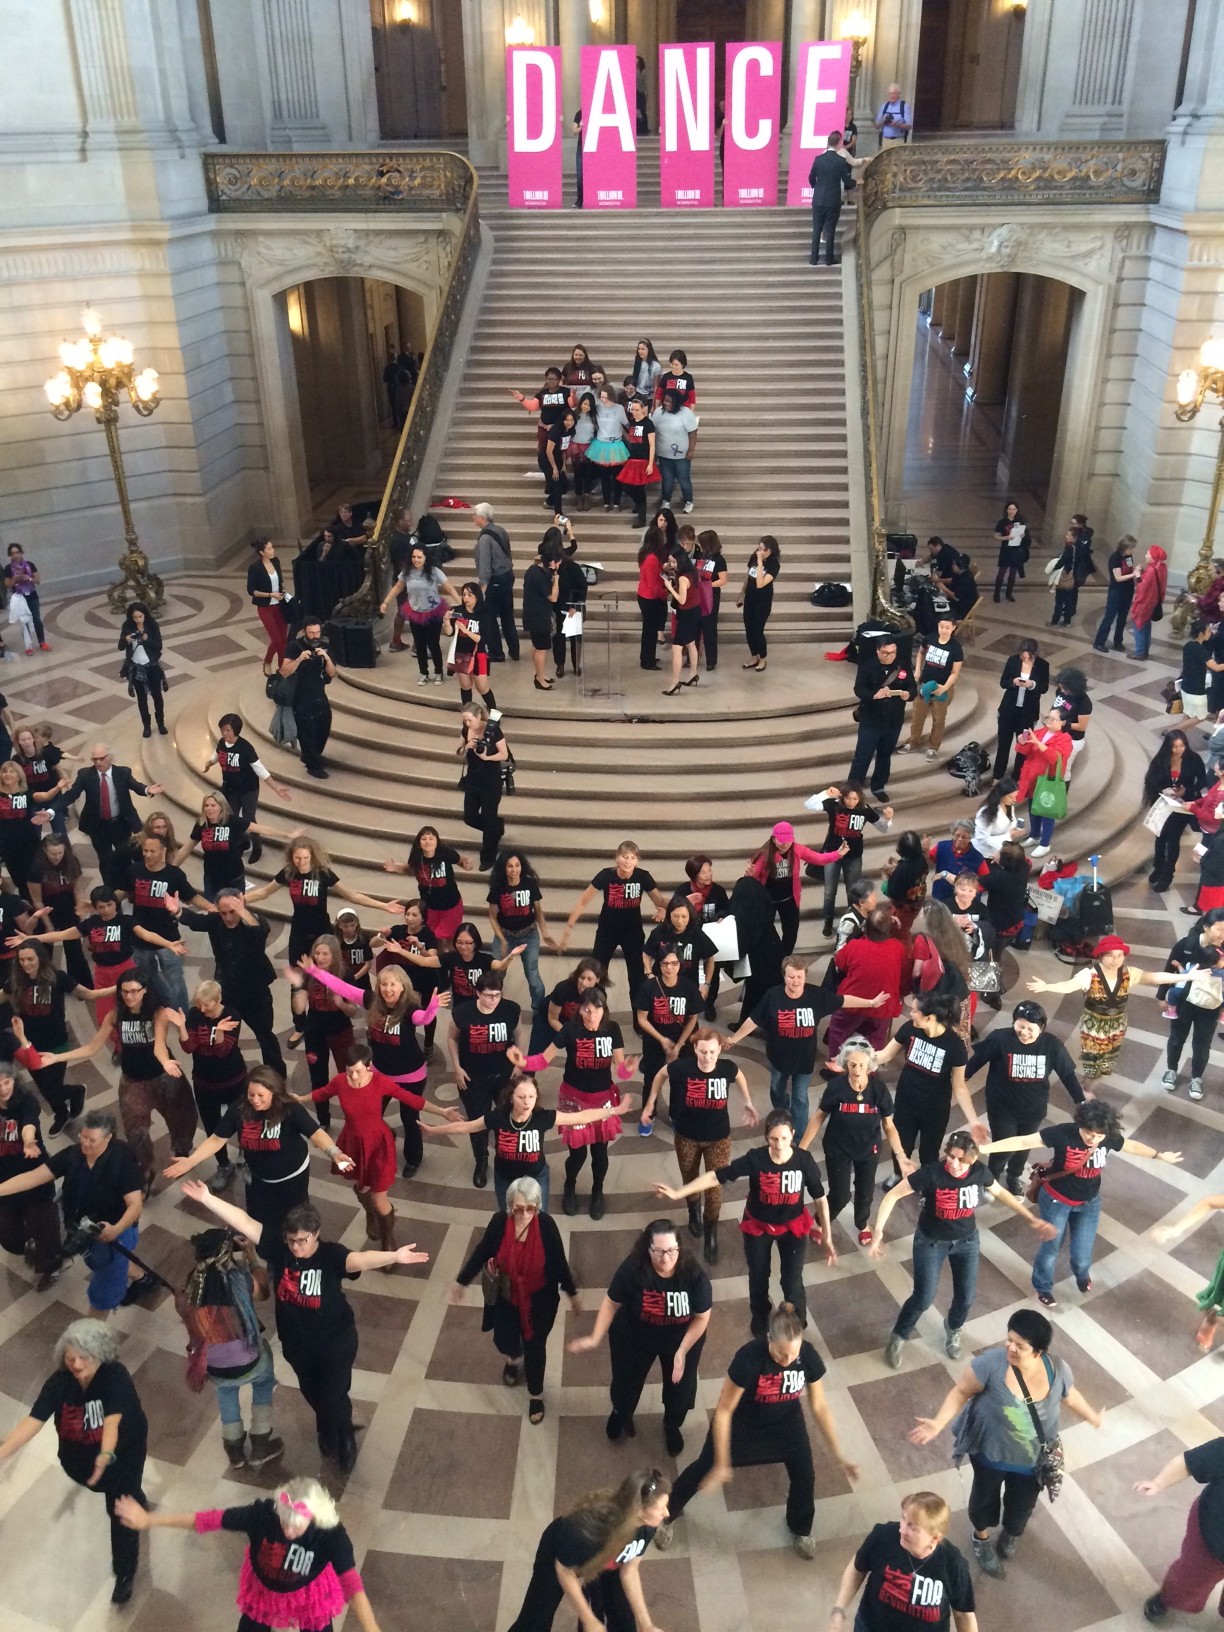 One Billion Rising Event Raises Awareness About City’s Fight Against Domestic Violence, Sex Trafficking